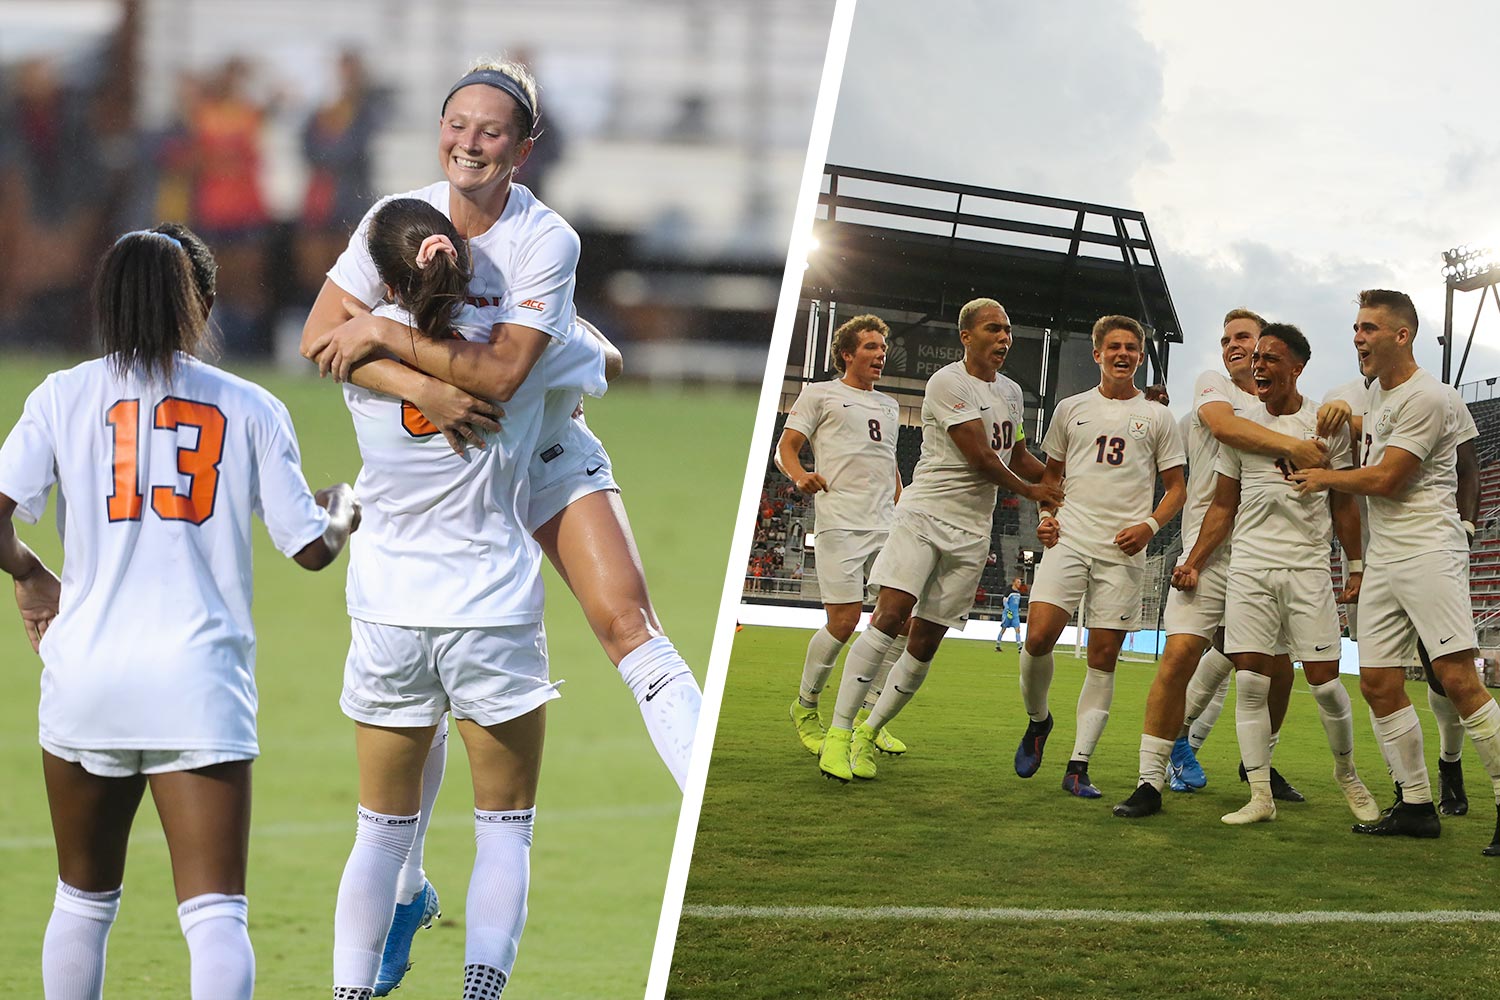 Left: Womens soccer team embraces after a victory.  right: Mens soccer team embraces after a victory